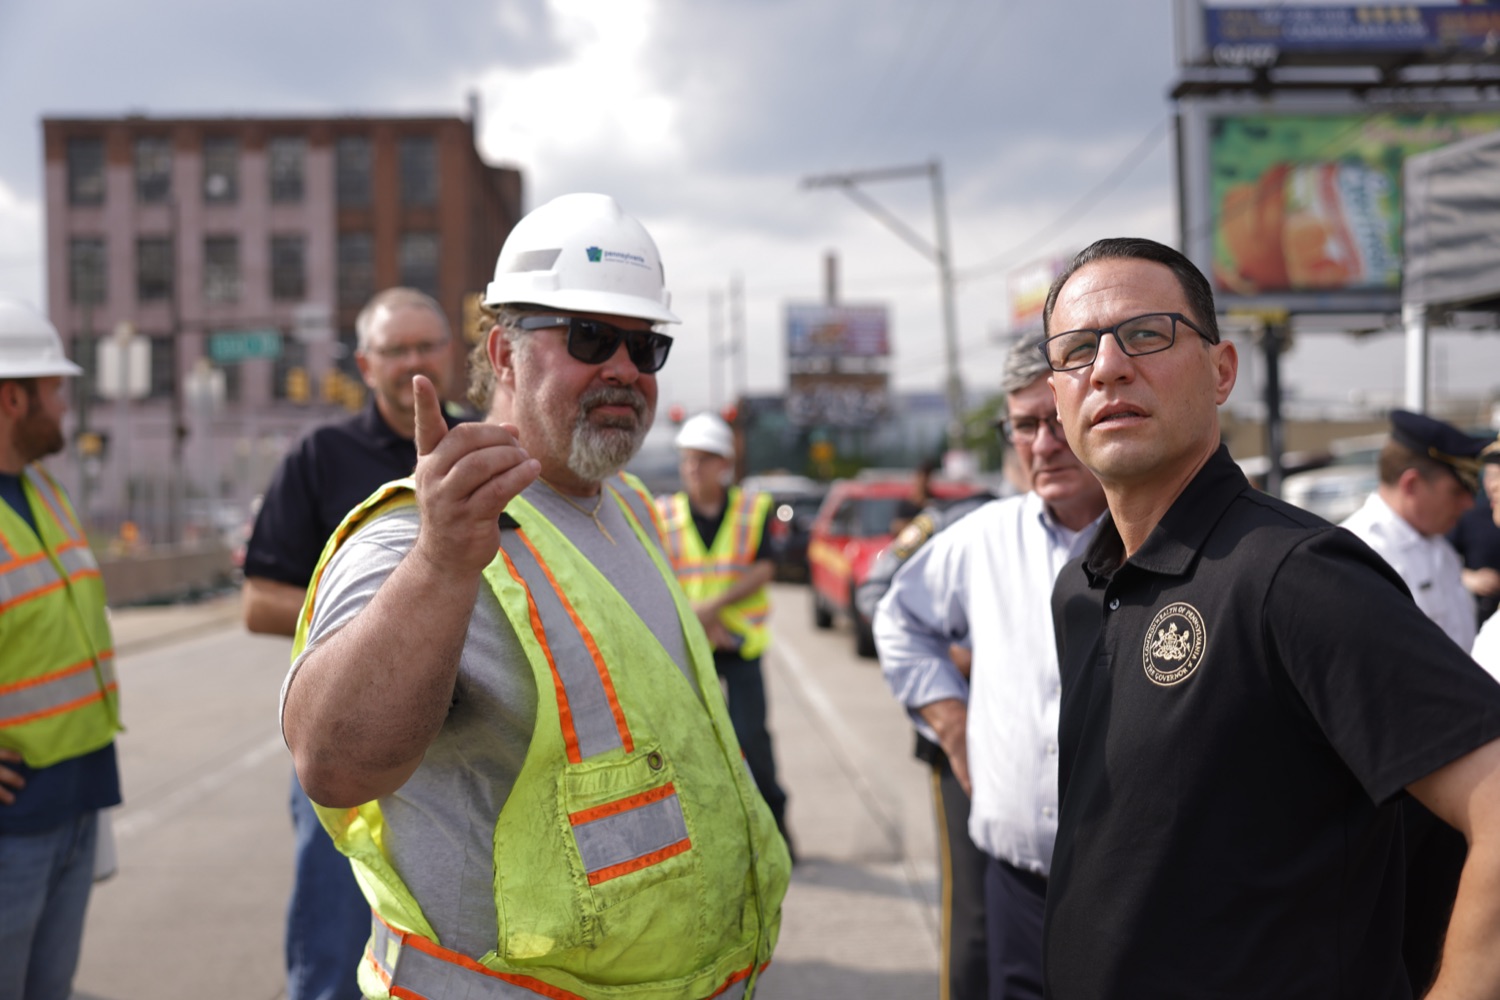 Governor Josh Shapiro speaks with workers on location.  Governor Josh Shapiro, along with officials from the Shapiro Administration, the City of Philadelphia, and SEPTA provided an update on the response to the vehicle fire on the Route 73/Cottman Avenue ramp under Interstate 95 in Philadelphia, which caused the roadway in this area to partially collapse, and heavily damaged the southbound structure. The interstate is closed in both directions..."Interstate 95 is a critical artery that supports our economy and plays an important role in Pennsylvanians' day to day lives. My Administration is all hands on deck to repair this safely and as efficiently as possible," said Governor Shapiro. "We will rebuild and recover - and in the meantime, we will make sure people can get to where they need to go safely."..This morning, according to first responders in Philadelphia and the Pennsylvania State Police, at approximately 6:20am, a vehicle fire under I-95 near the Cottman Avenue exit in Northeast Philadelphia caused a portion of the highway to collapse. Preliminary reports indicate a commercial truck carrying a petroleum-based product was the source of the fire. Since the crash occurred, PEMA has also been on-site, coordinating response efforts with local and federal partners.  JUNE 11, 2023 - PHILADELPHIA, PA.<br><a href="https://filesource.amperwave.net/commonwealthofpa/photo/23248_gov_I95Collapse_dz_003.JPG" target="_blank">⇣ Download Photo</a>